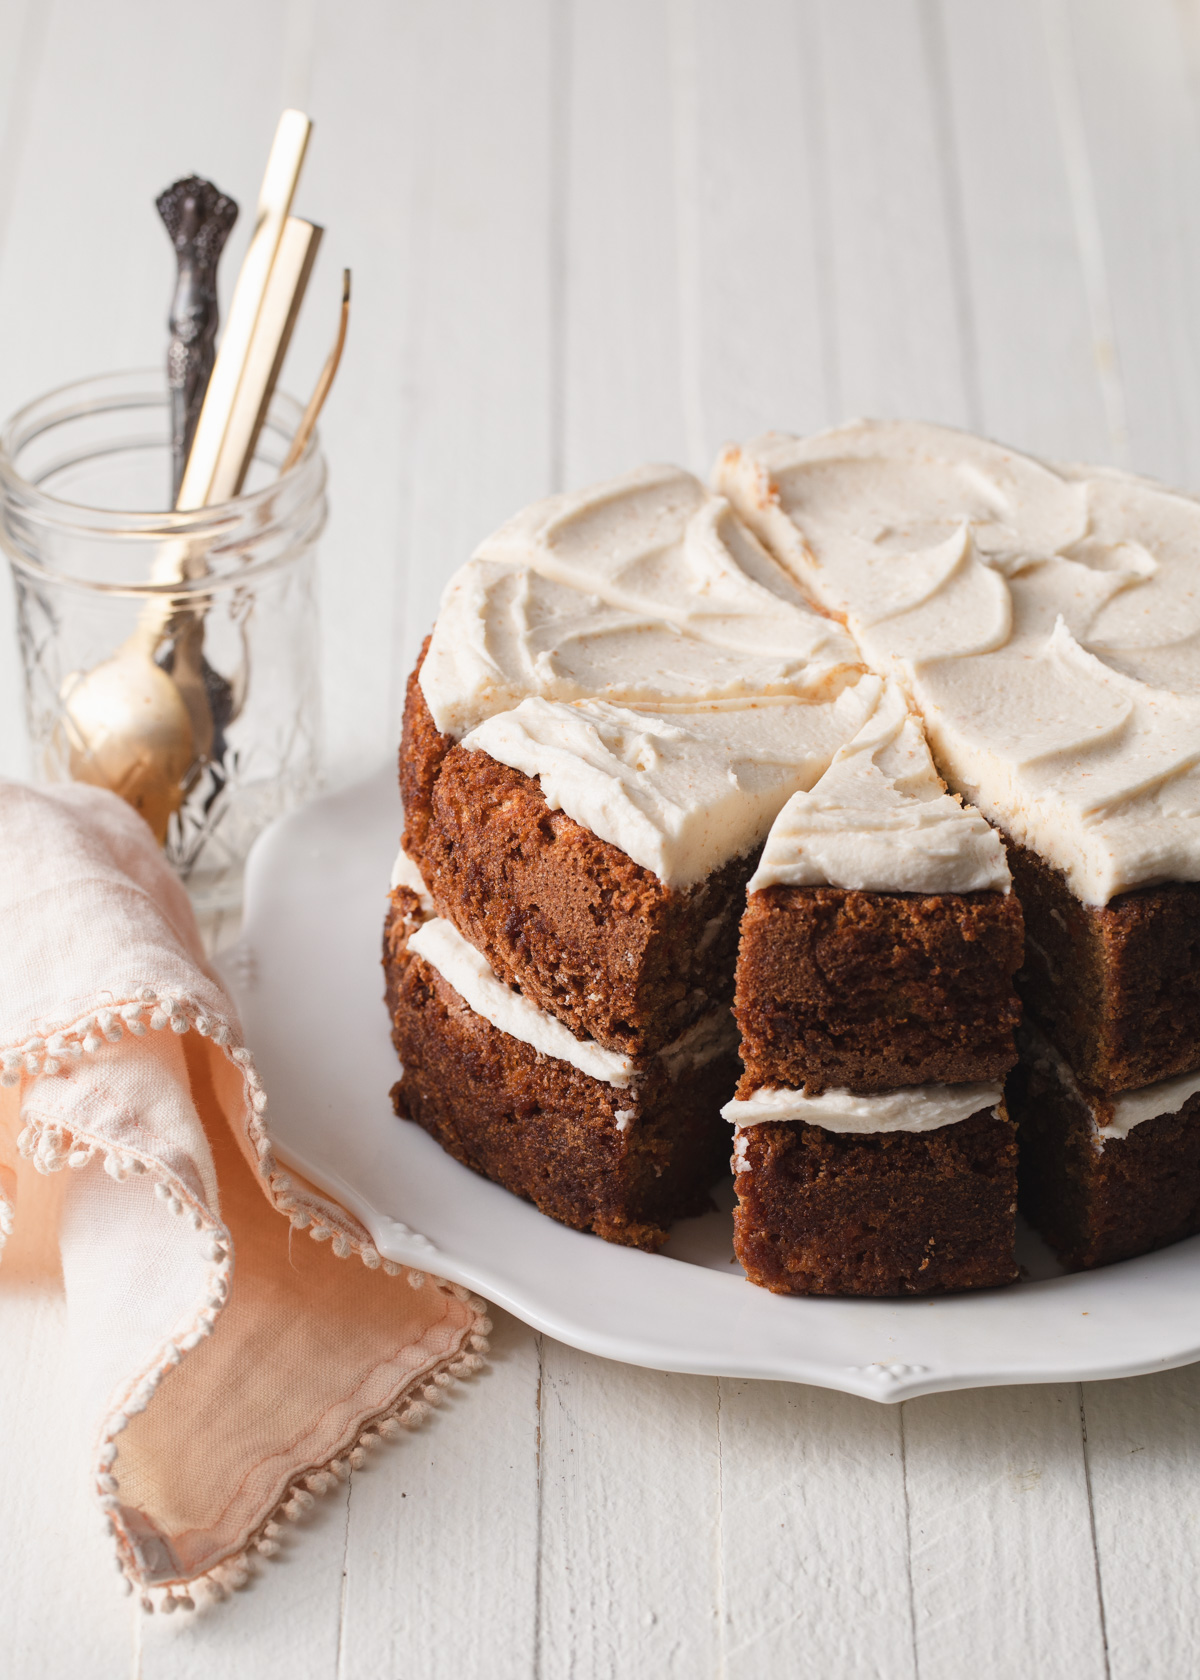 A two-layer carrot cake with brown butter filling and frosting that has been sliced on a platter.